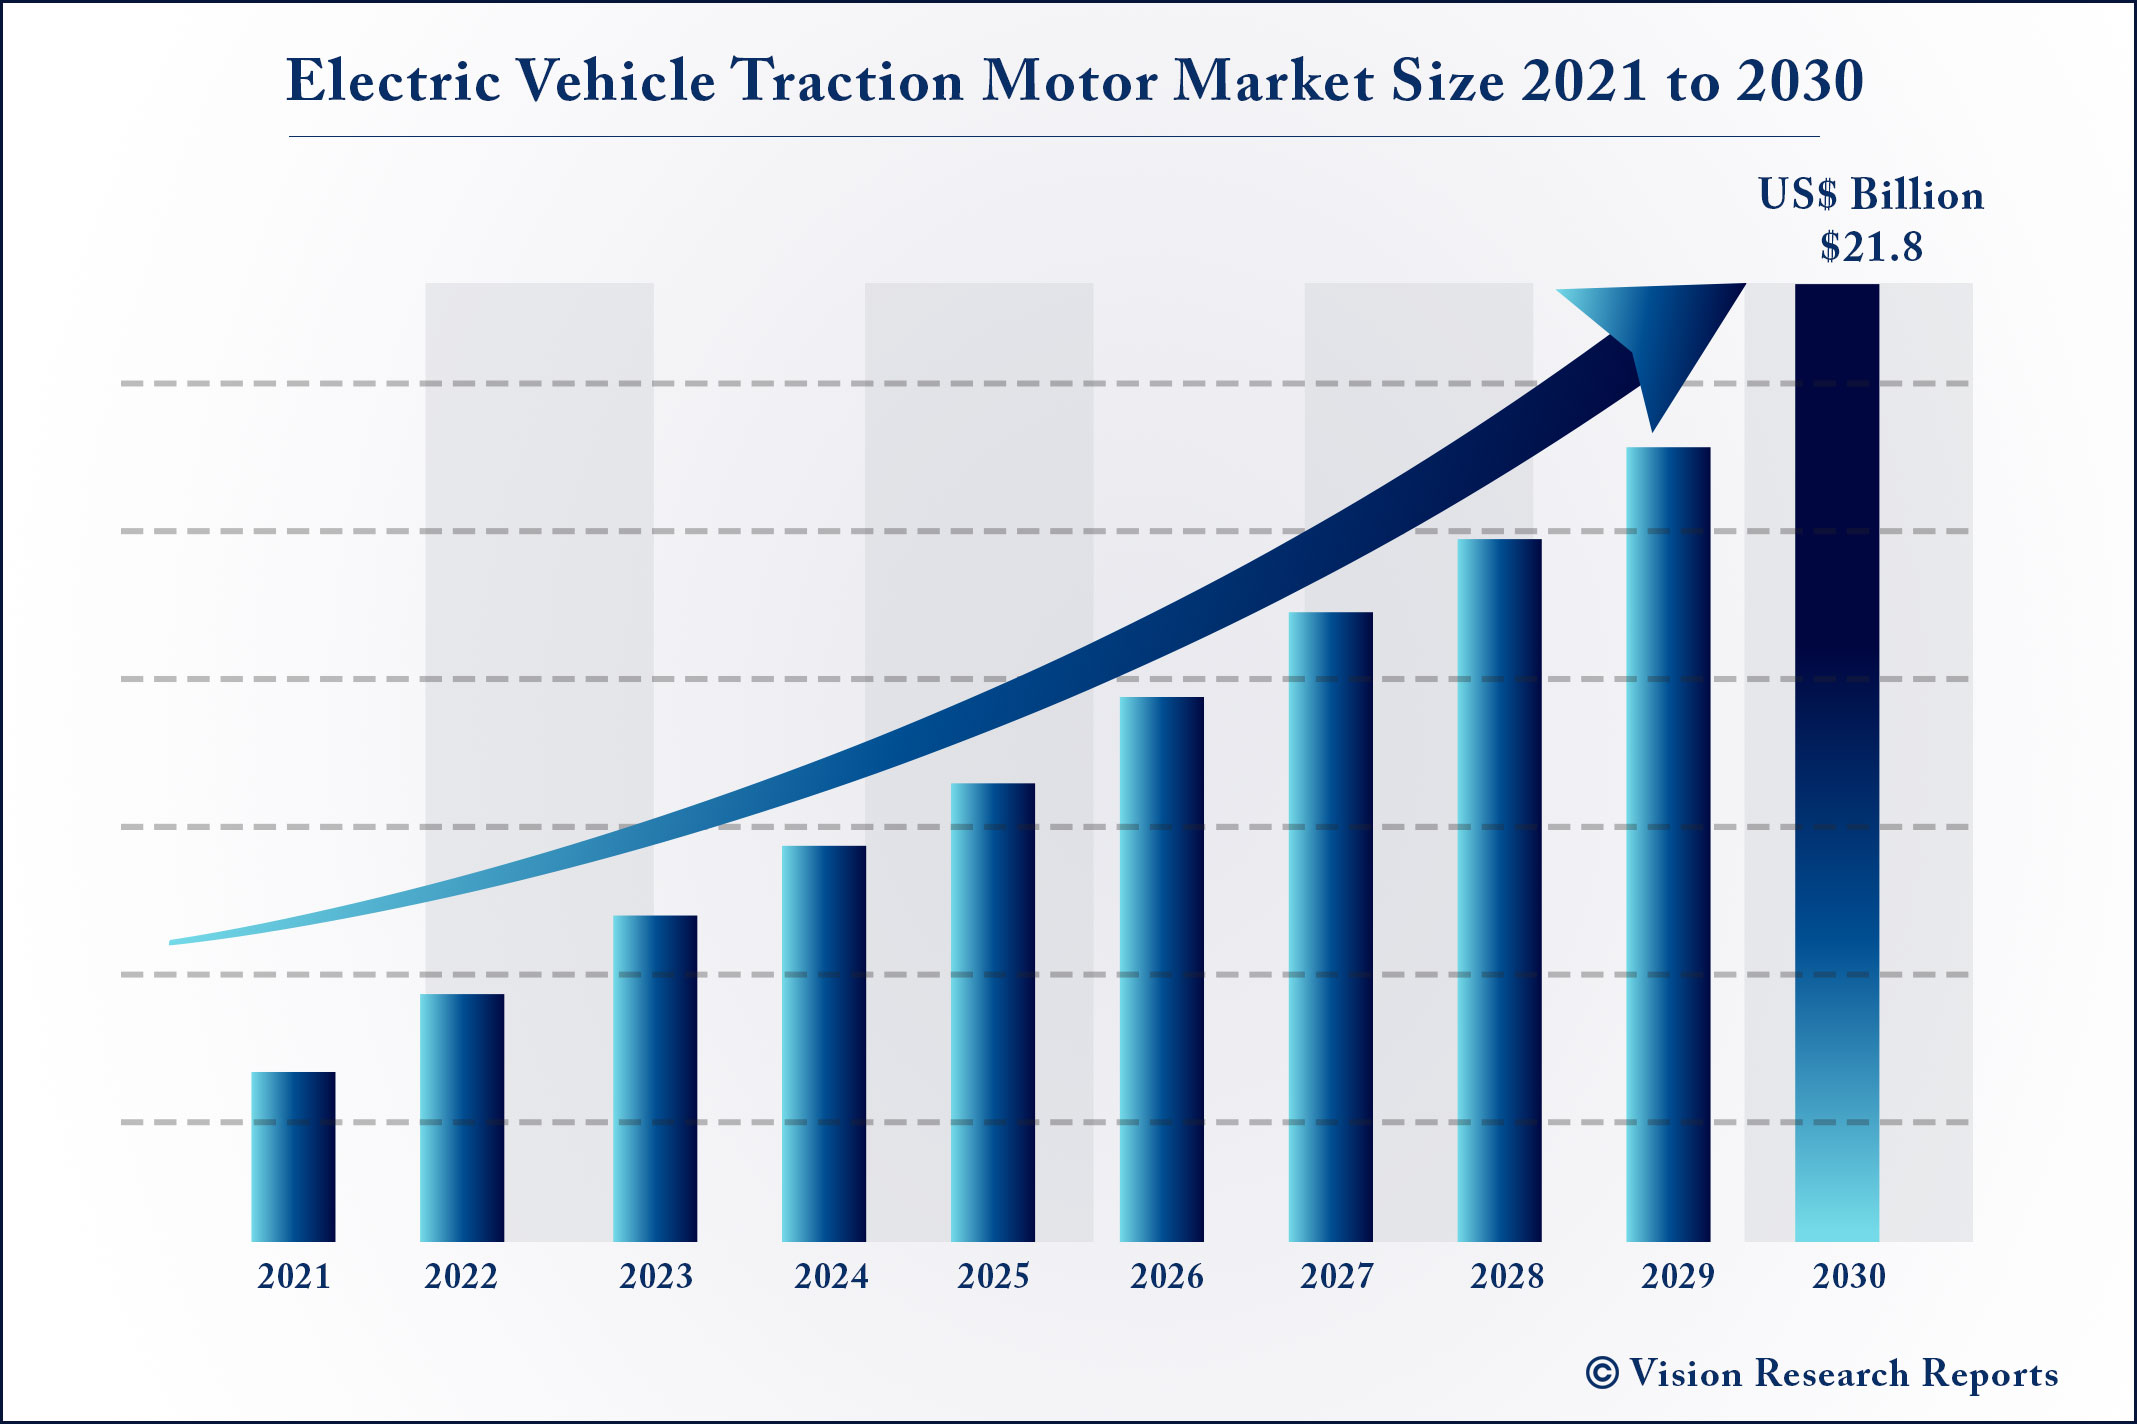 Electric Vehicle Traction Motor Market Size 2021 to 2030